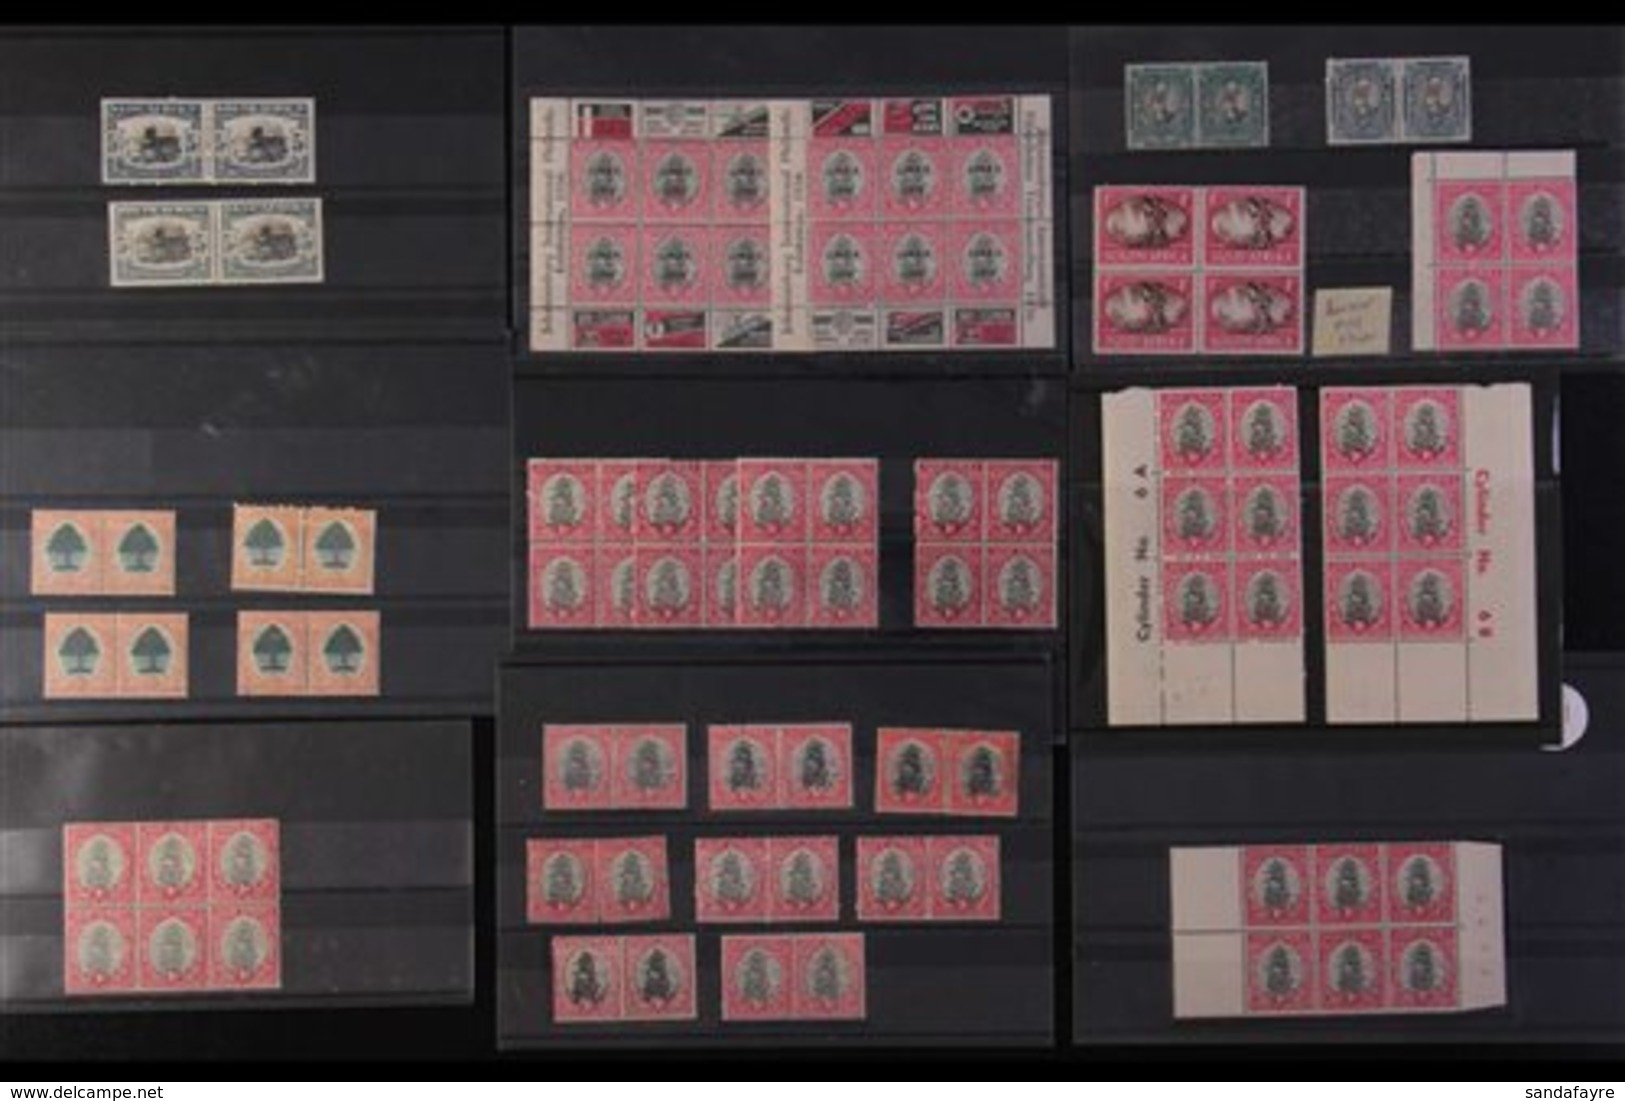 1926-1949 SPECIALIST'S BETTER FINE MINT ASSEMBLY  On Stock Cards & Pages, Some Stamps Are Never Hinged, All As Horiz Pai - Ohne Zuordnung